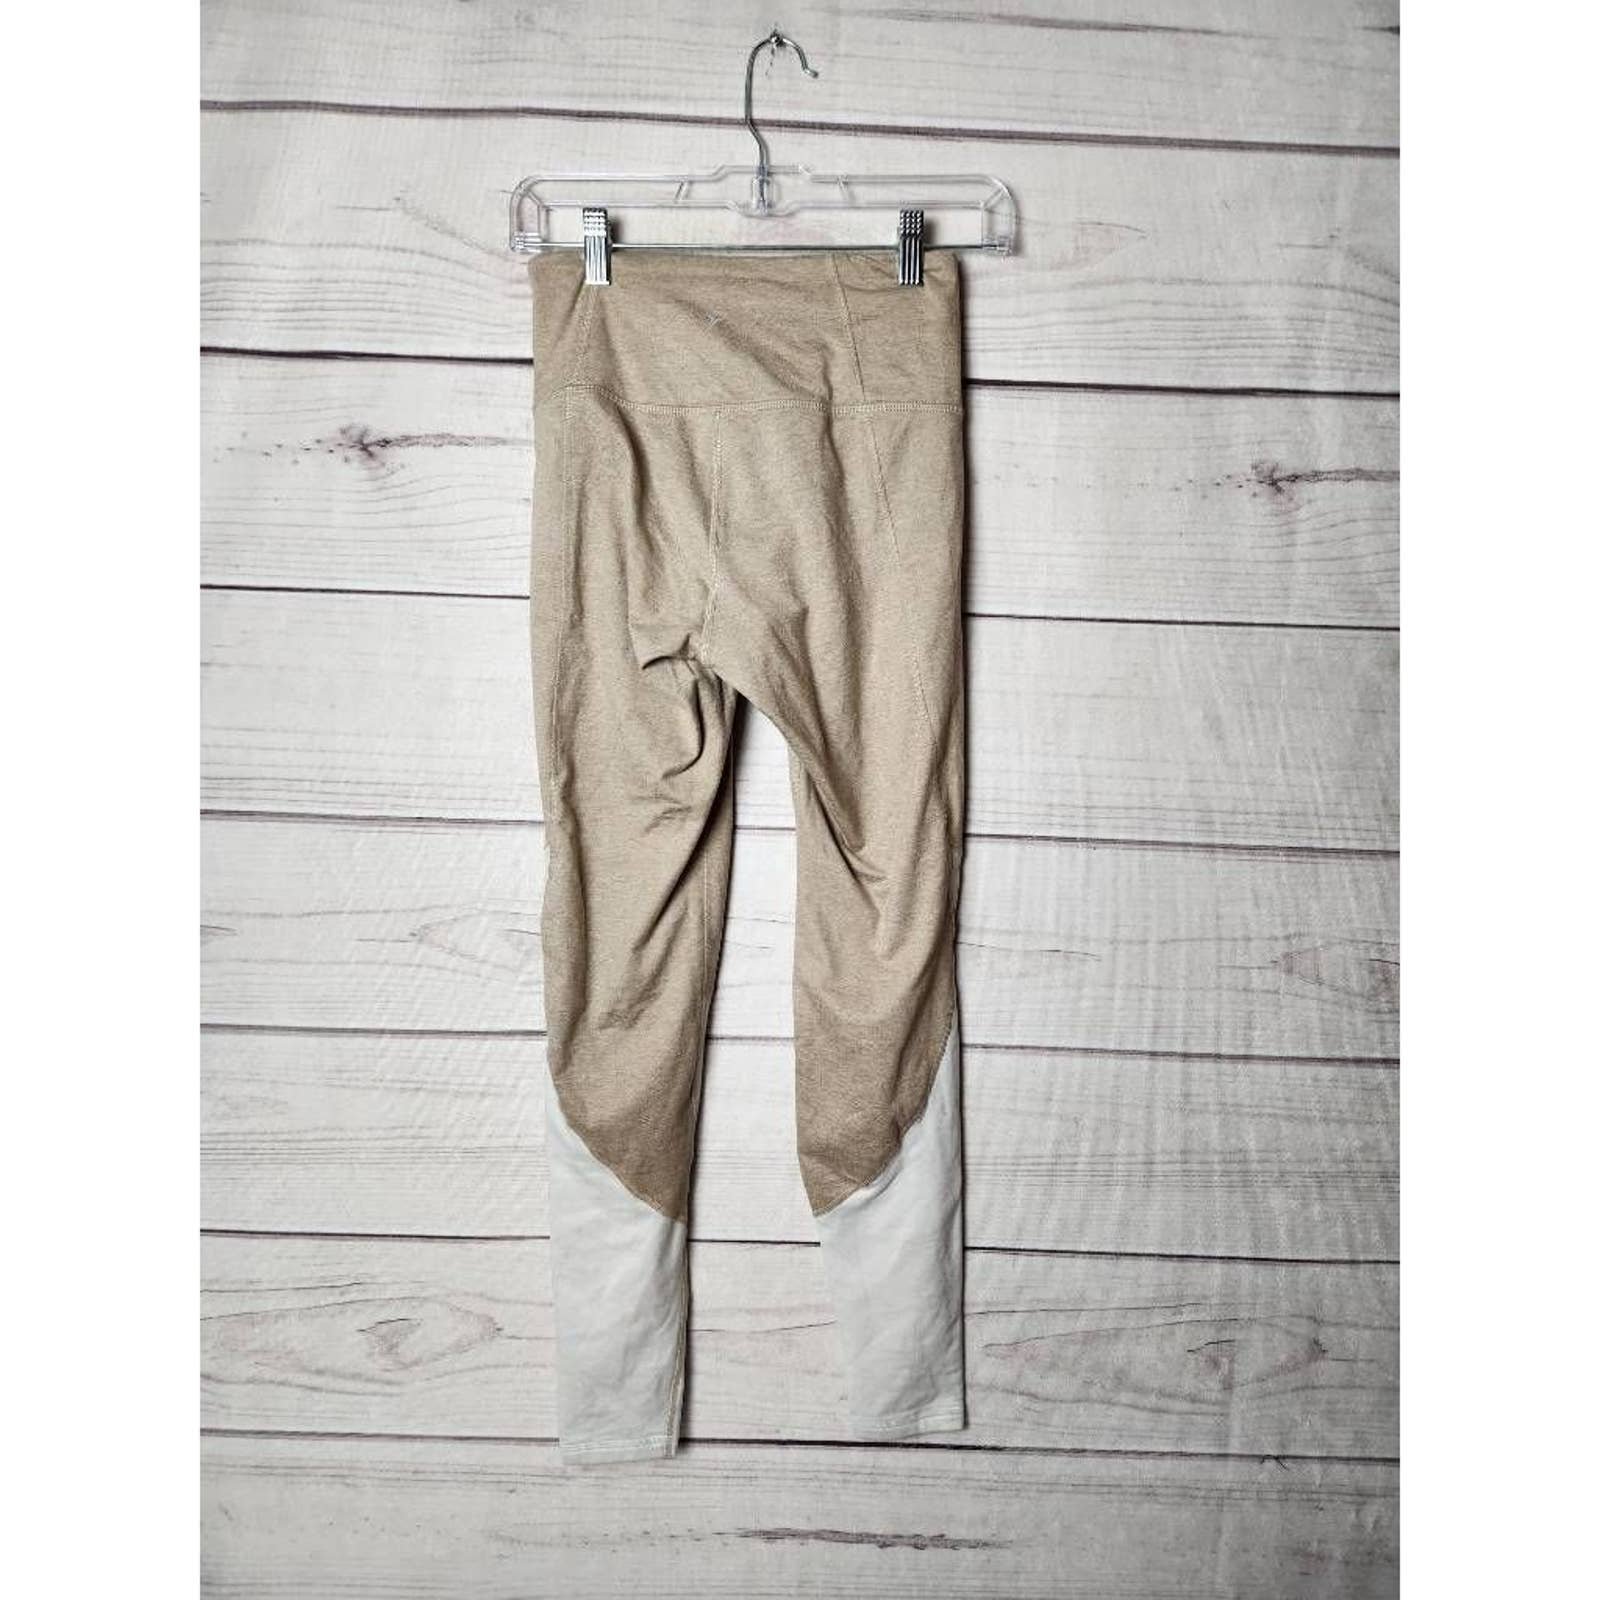 reasonable price Old Navy Active Womens Cozecore Cropped Leggings Beige High Rise Color Block S GbRTPqre8 Factory Price